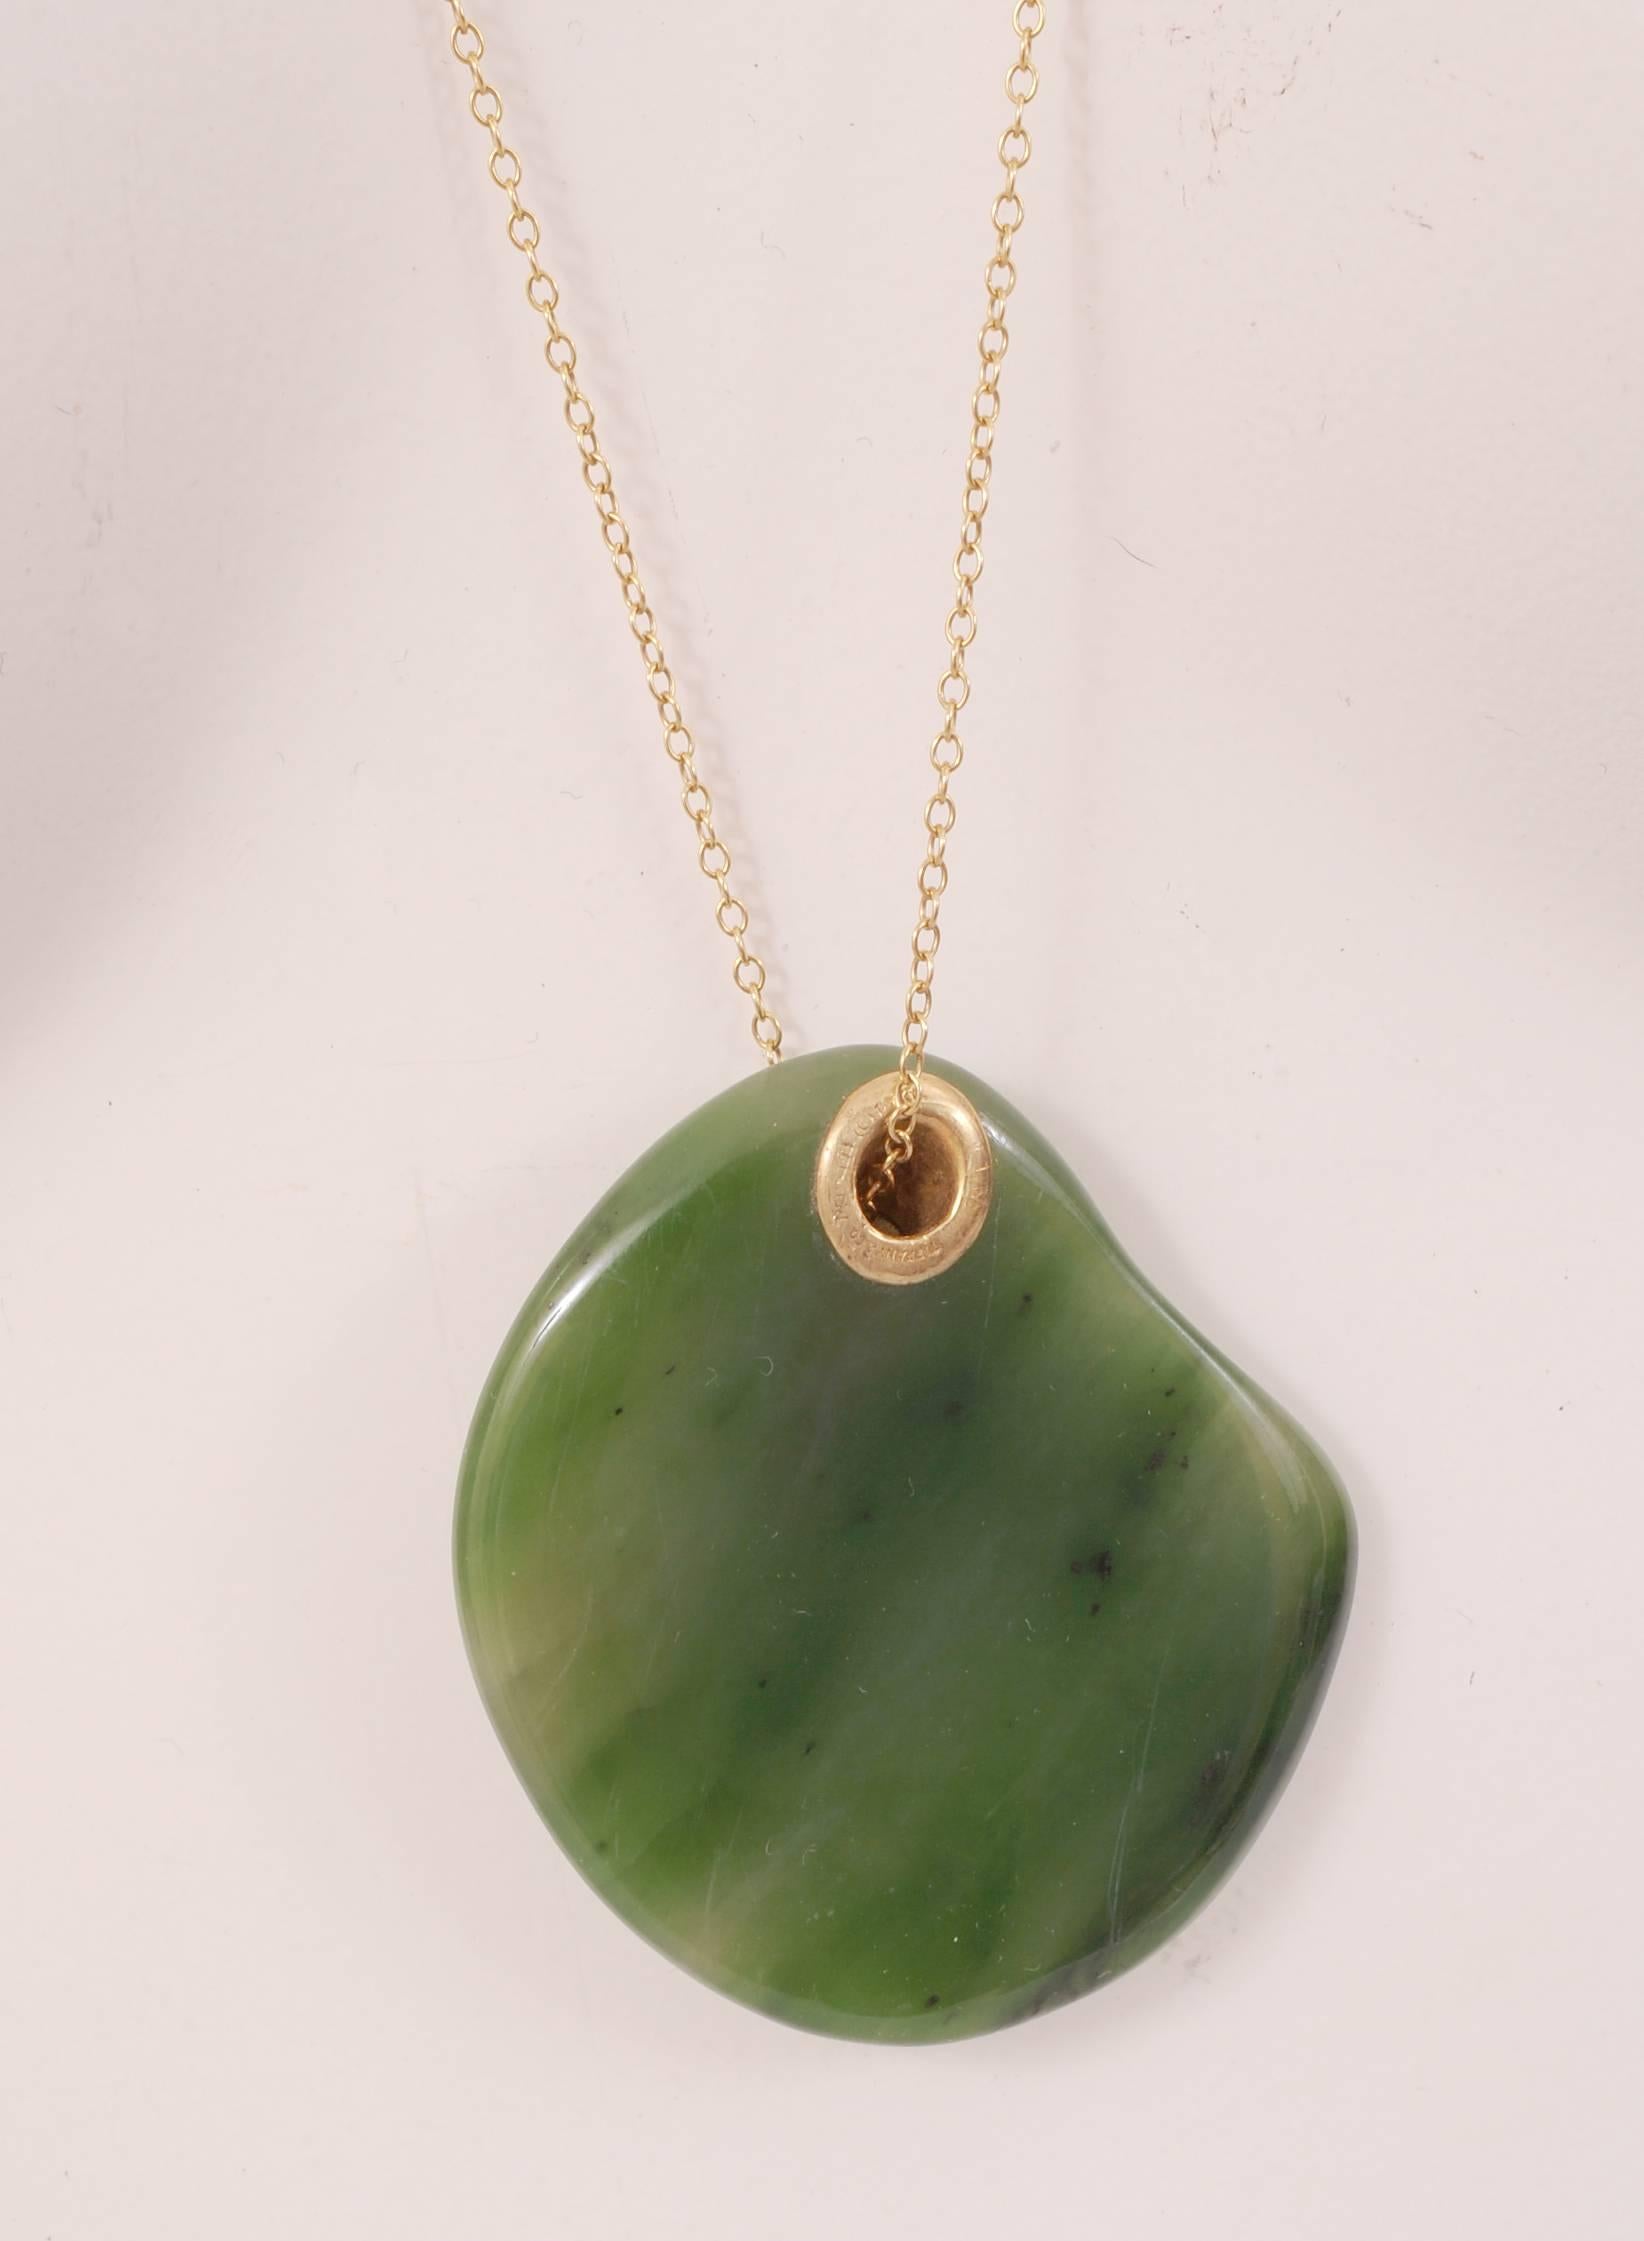 A lovely large piece of green jade has an 18 karat  gold diagonal opening threaded with an 18 karat gold chain. It is signed on the back opening and the chain and it is in excellent condition. It comes with a Tiffany suede pouch and